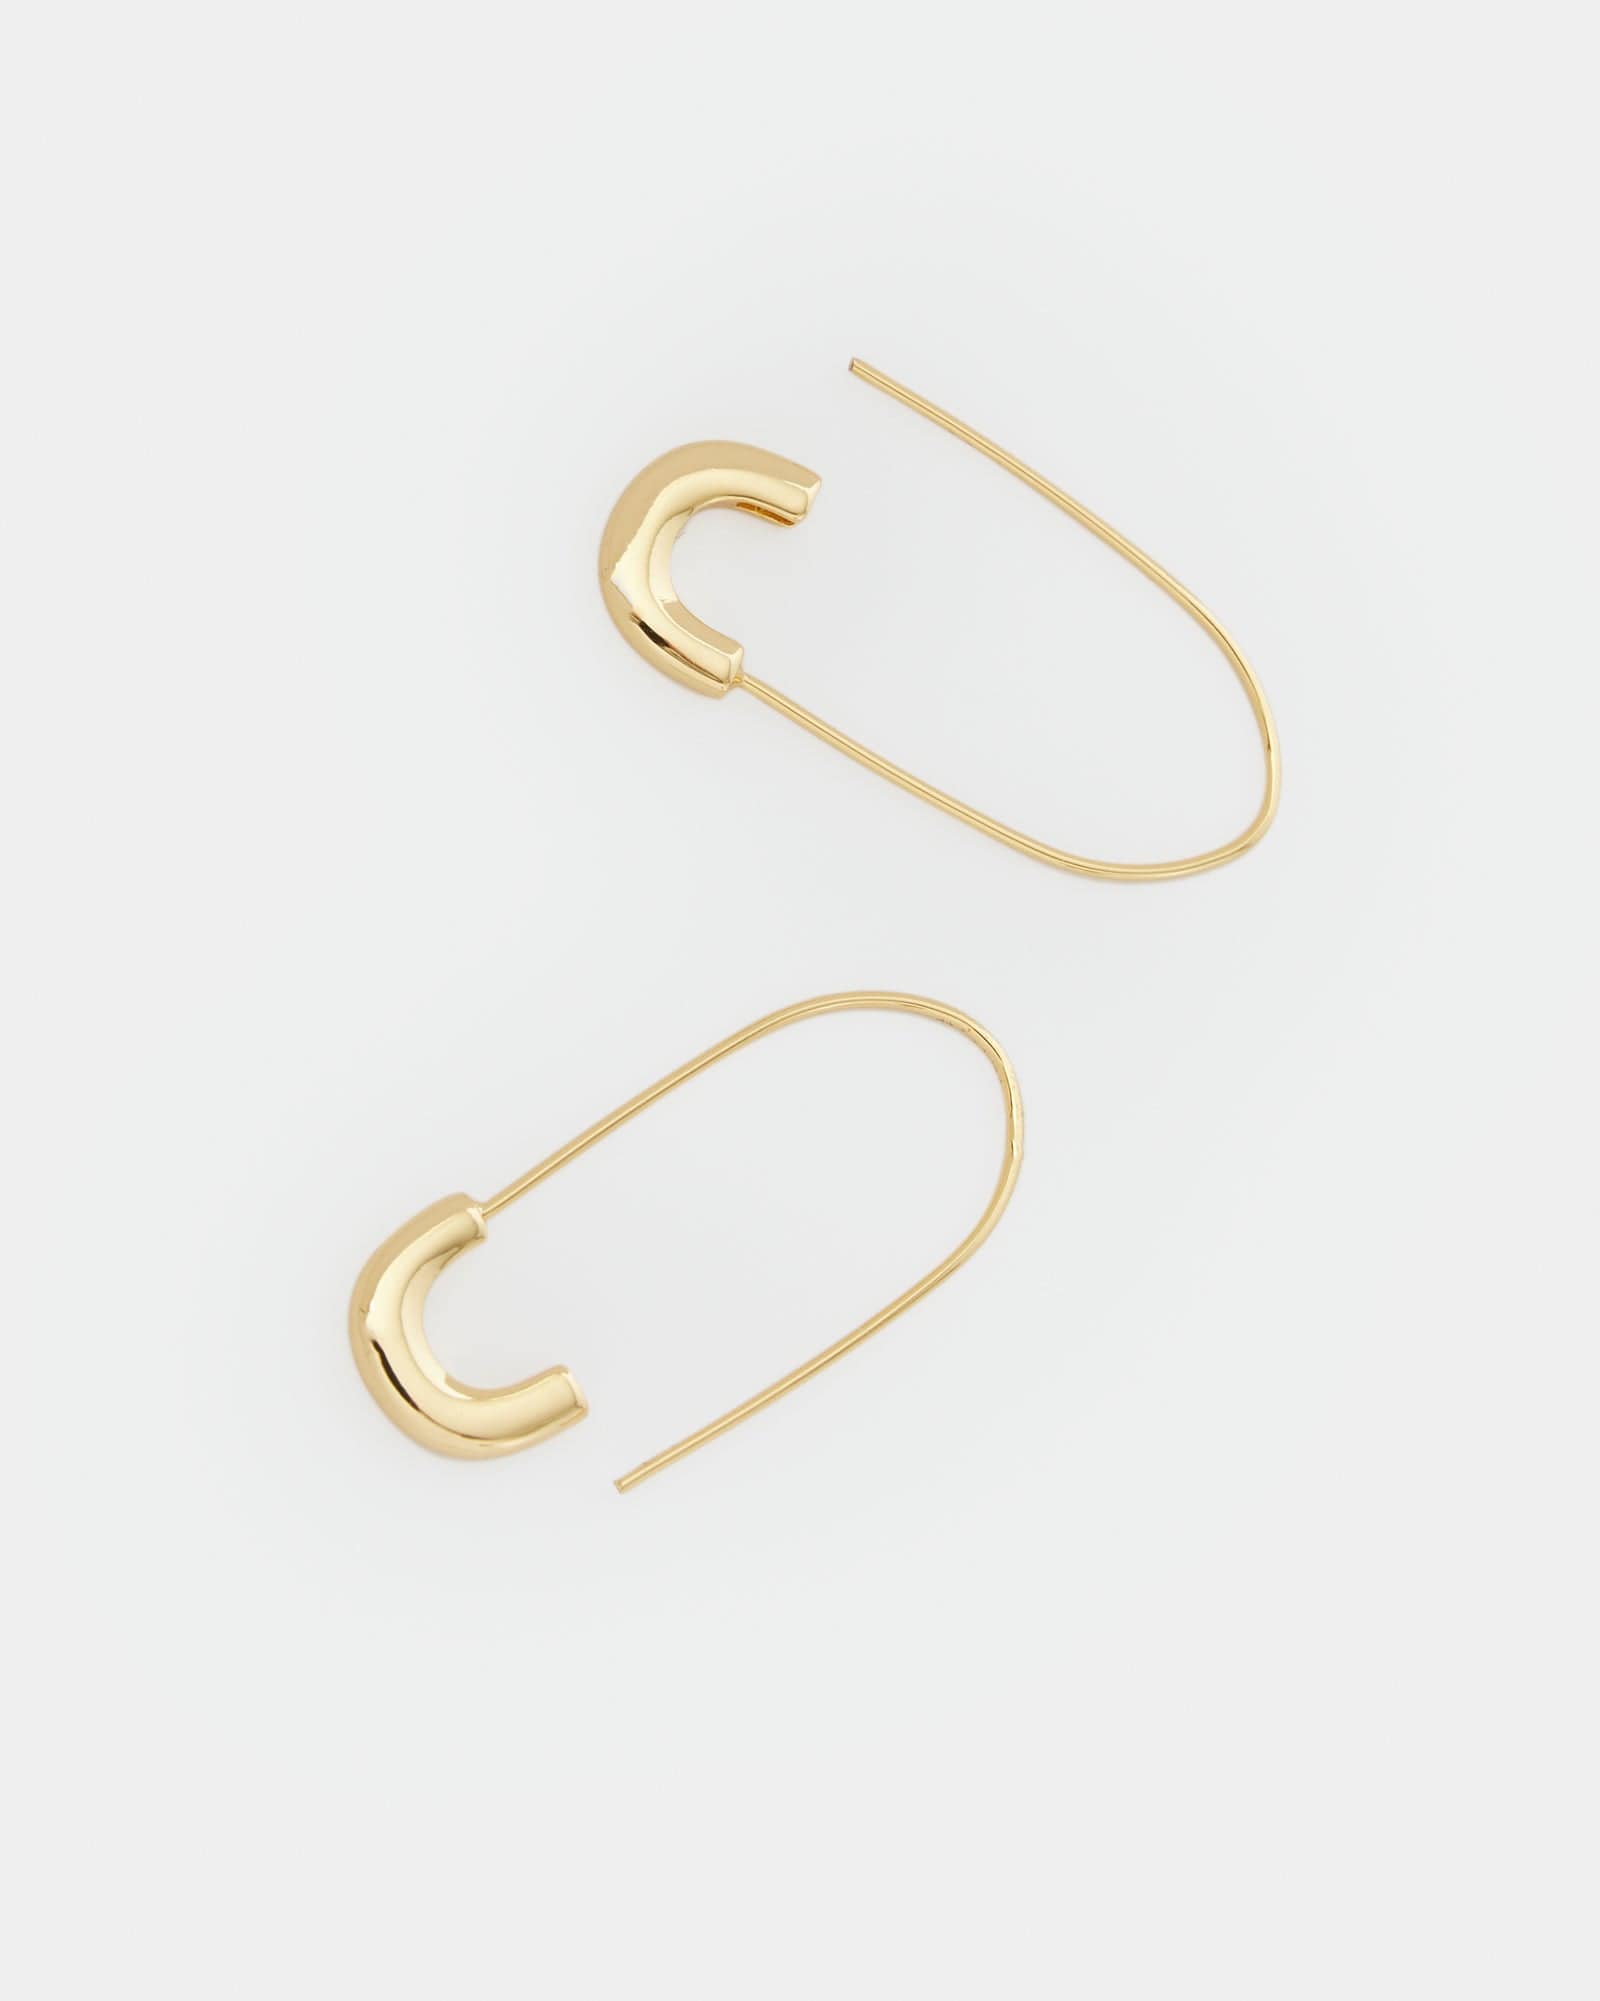 Two gold earrings resembling safety pins